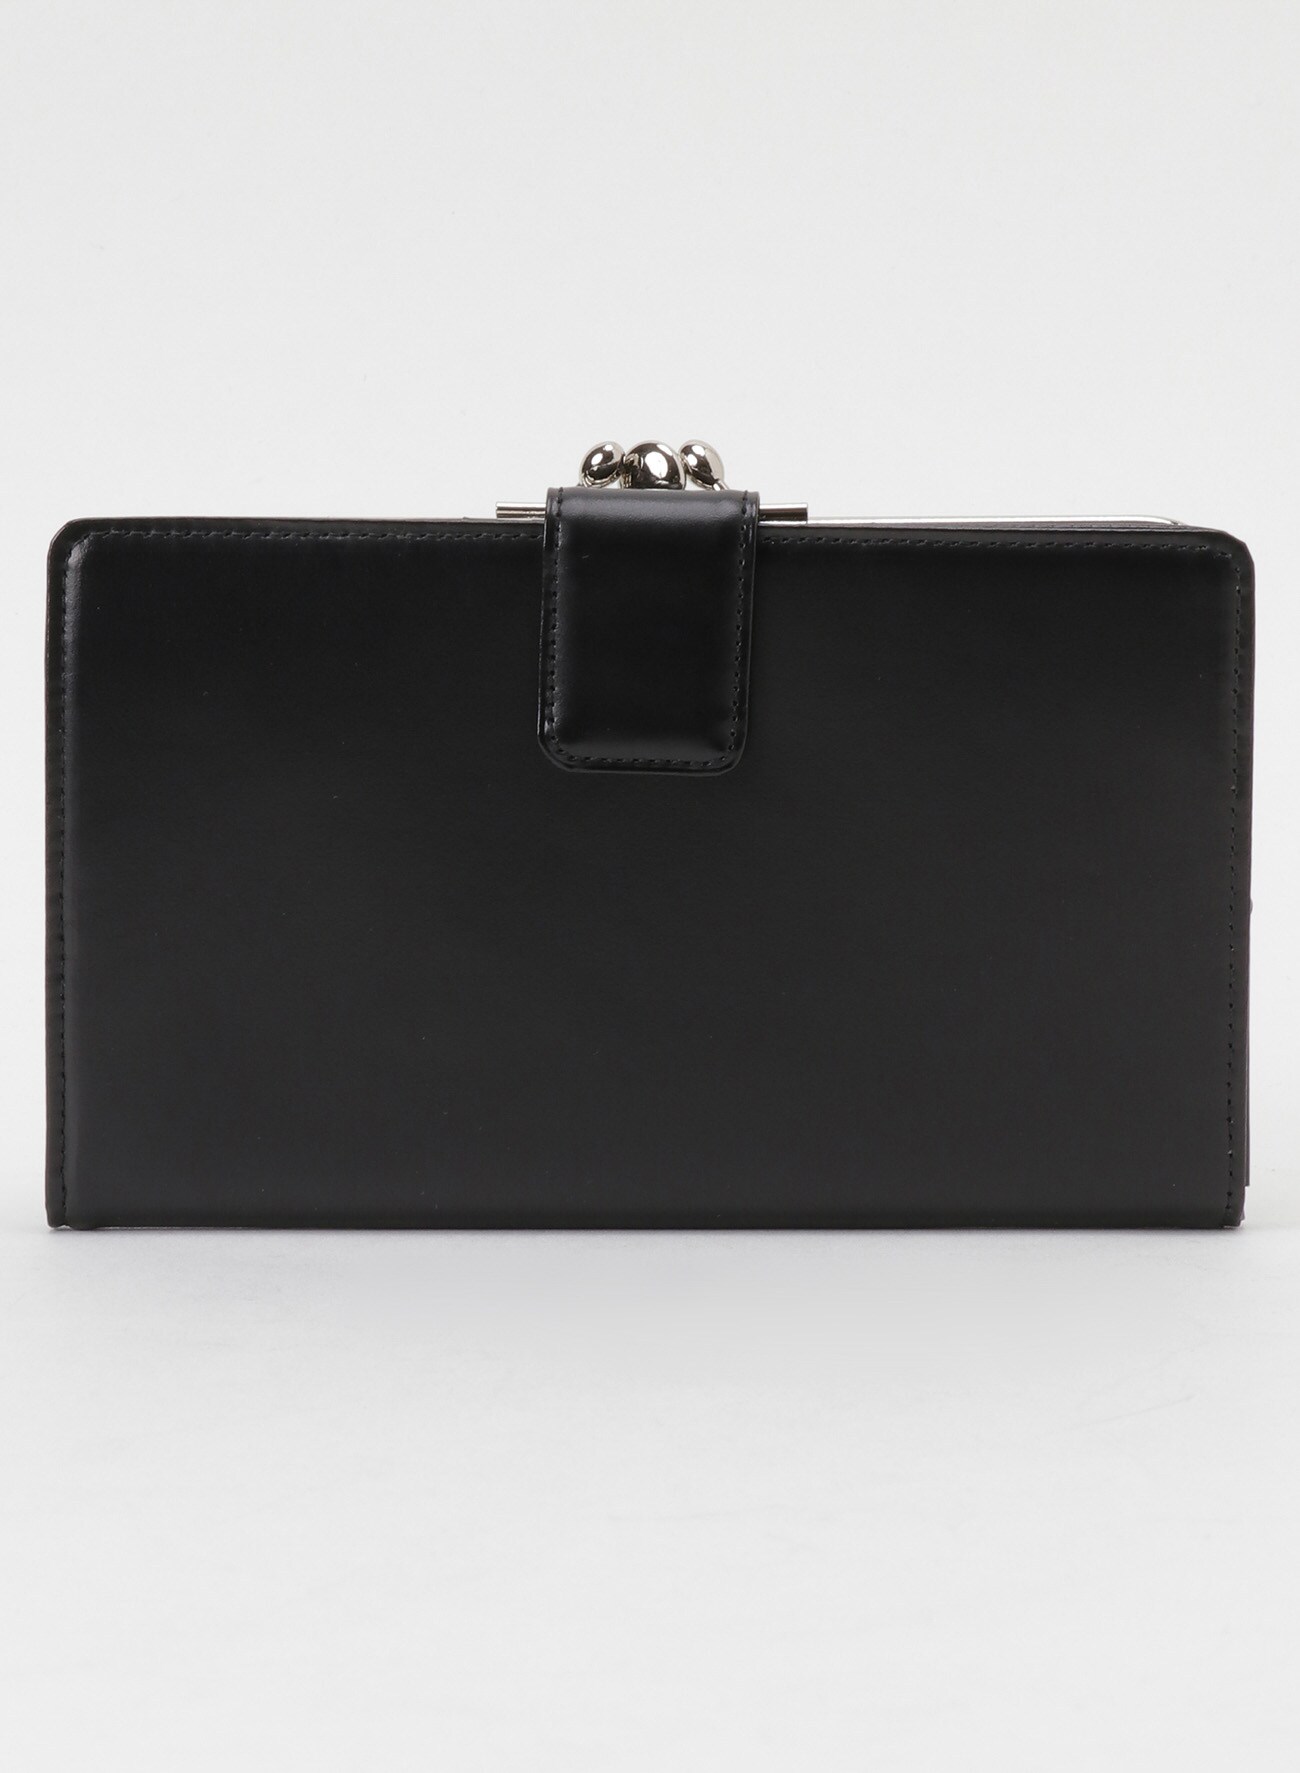 GLOSS SMOOTH LEATHER LONG WALLET(FREE SIZE Black): Y's｜THE SHOP